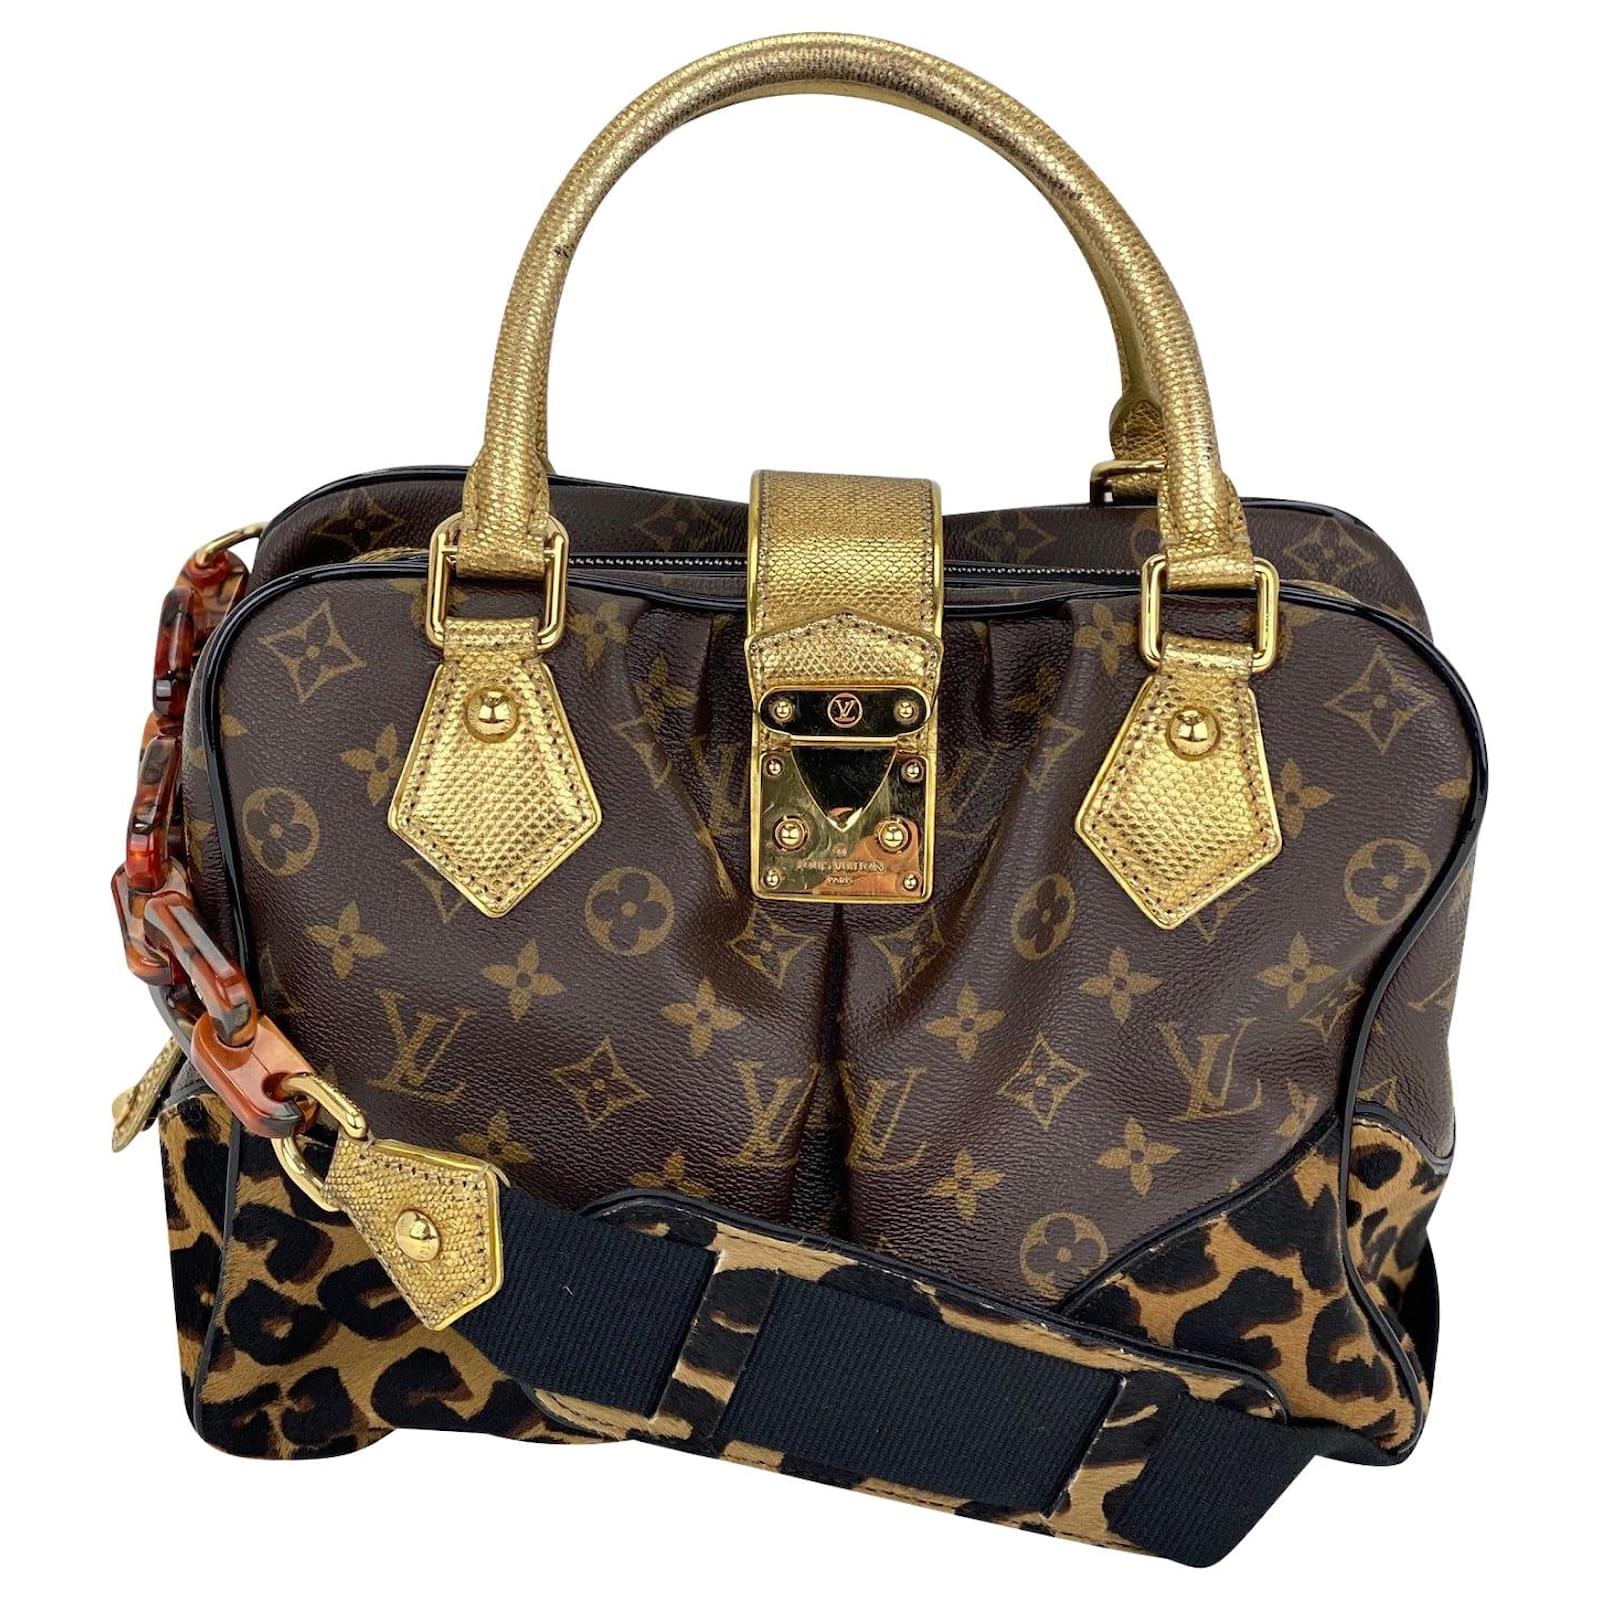 A Look at OneofaKind and Rare Louis Vuitton Exotic Bags  PurseBlog